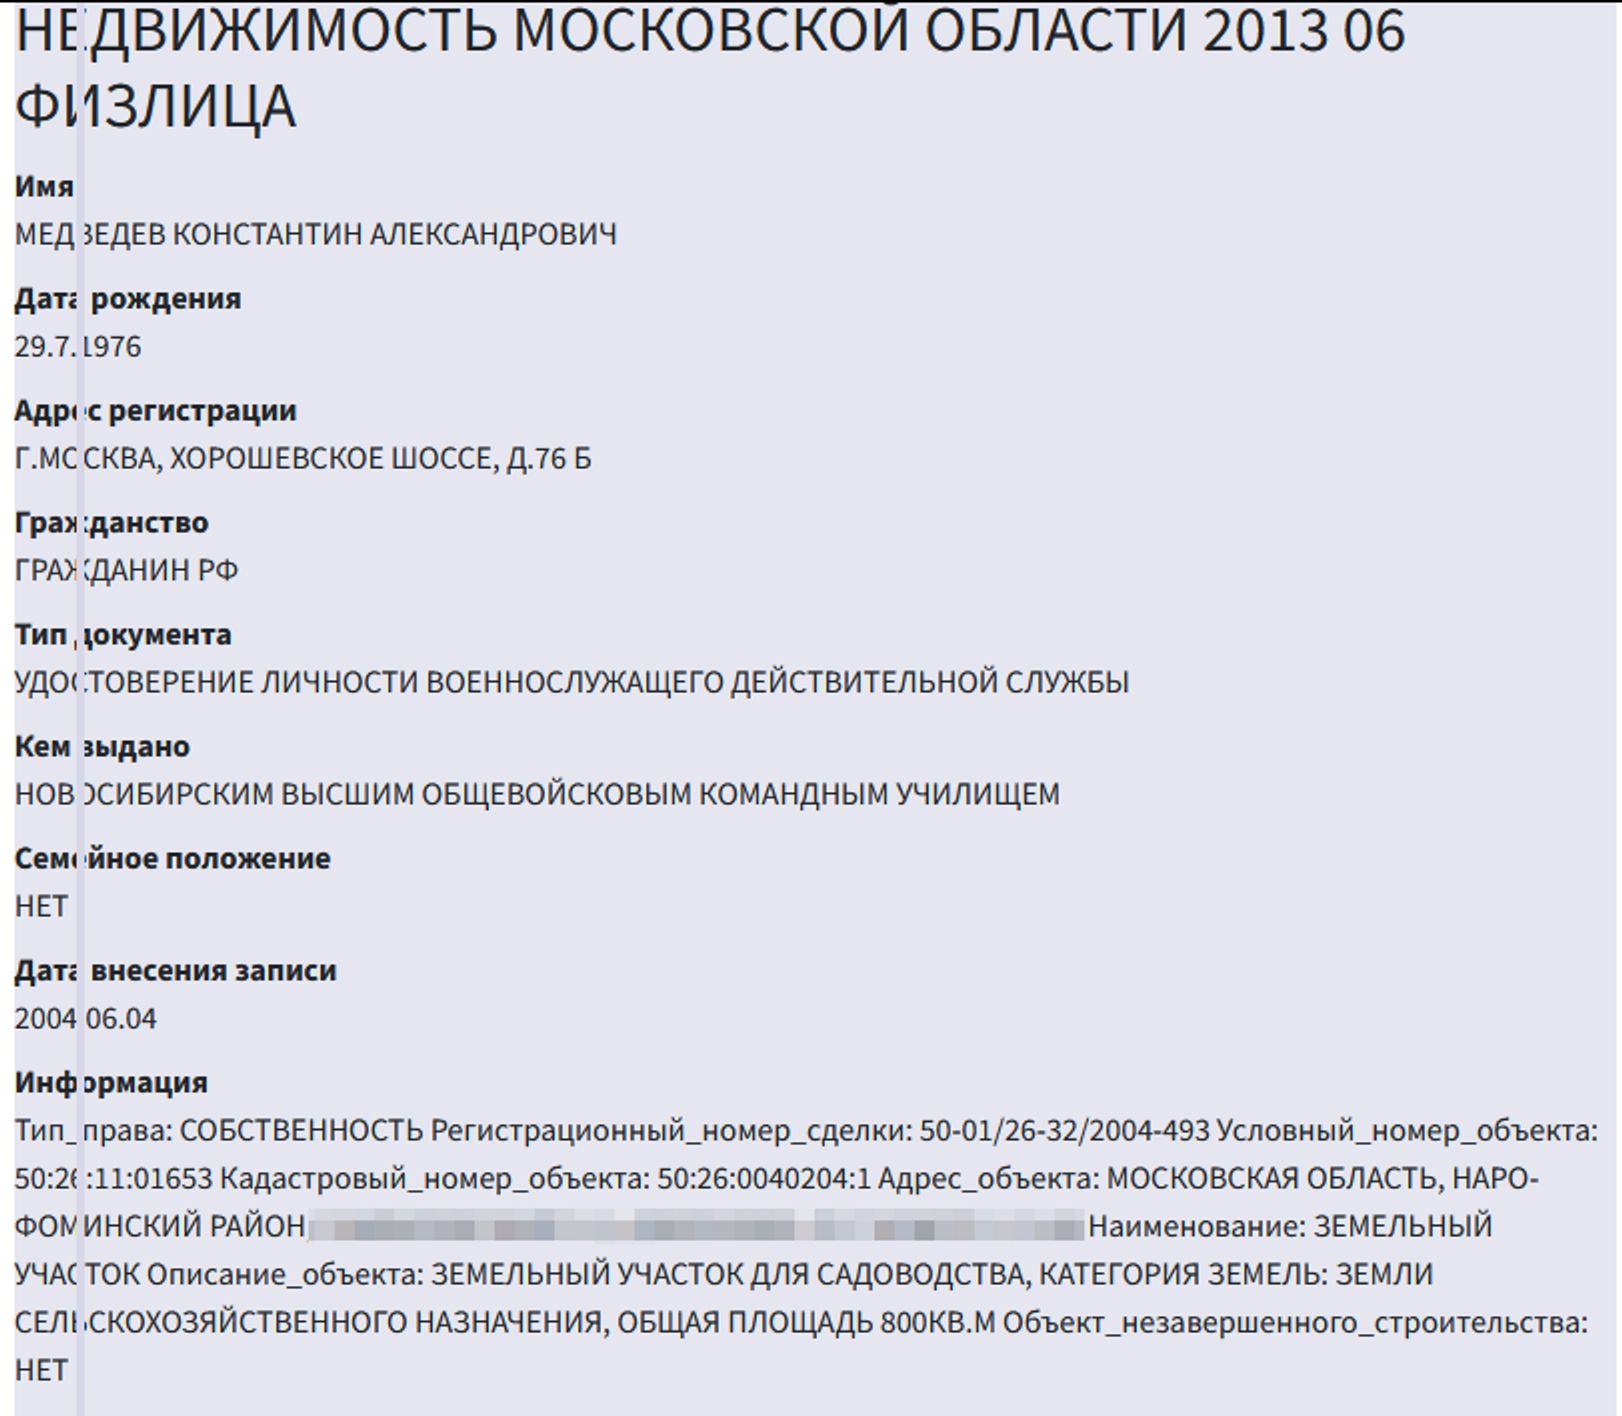 Extract from a leaked Moscow residential database showing that, as of 2013, Medvedev was registered at the GRU Military Diplomatic Academy's dormitory on Khoroshoveskoye Highway.